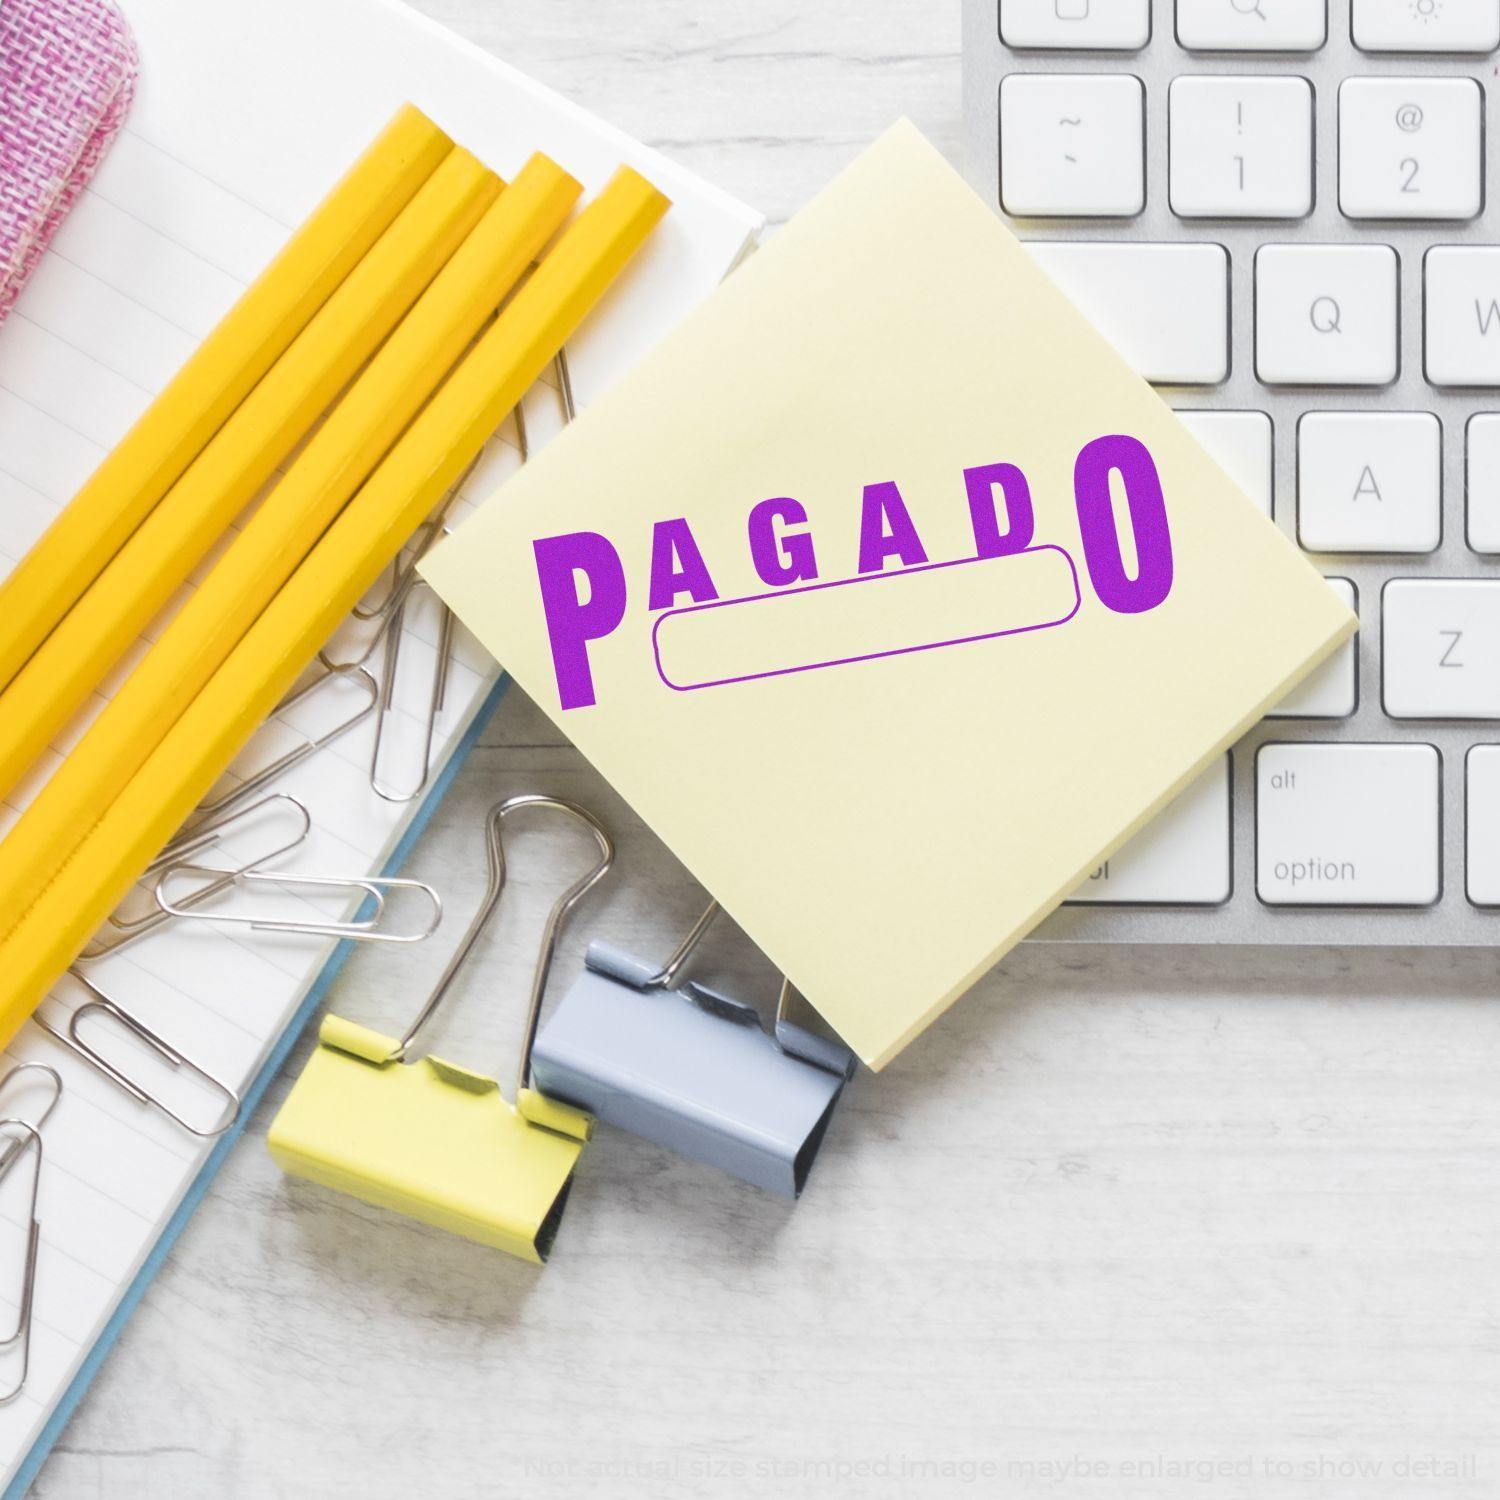 A stock office rubber stamp with a stamped image showing how the text "PAGADO" with a box is displayed after stamping.